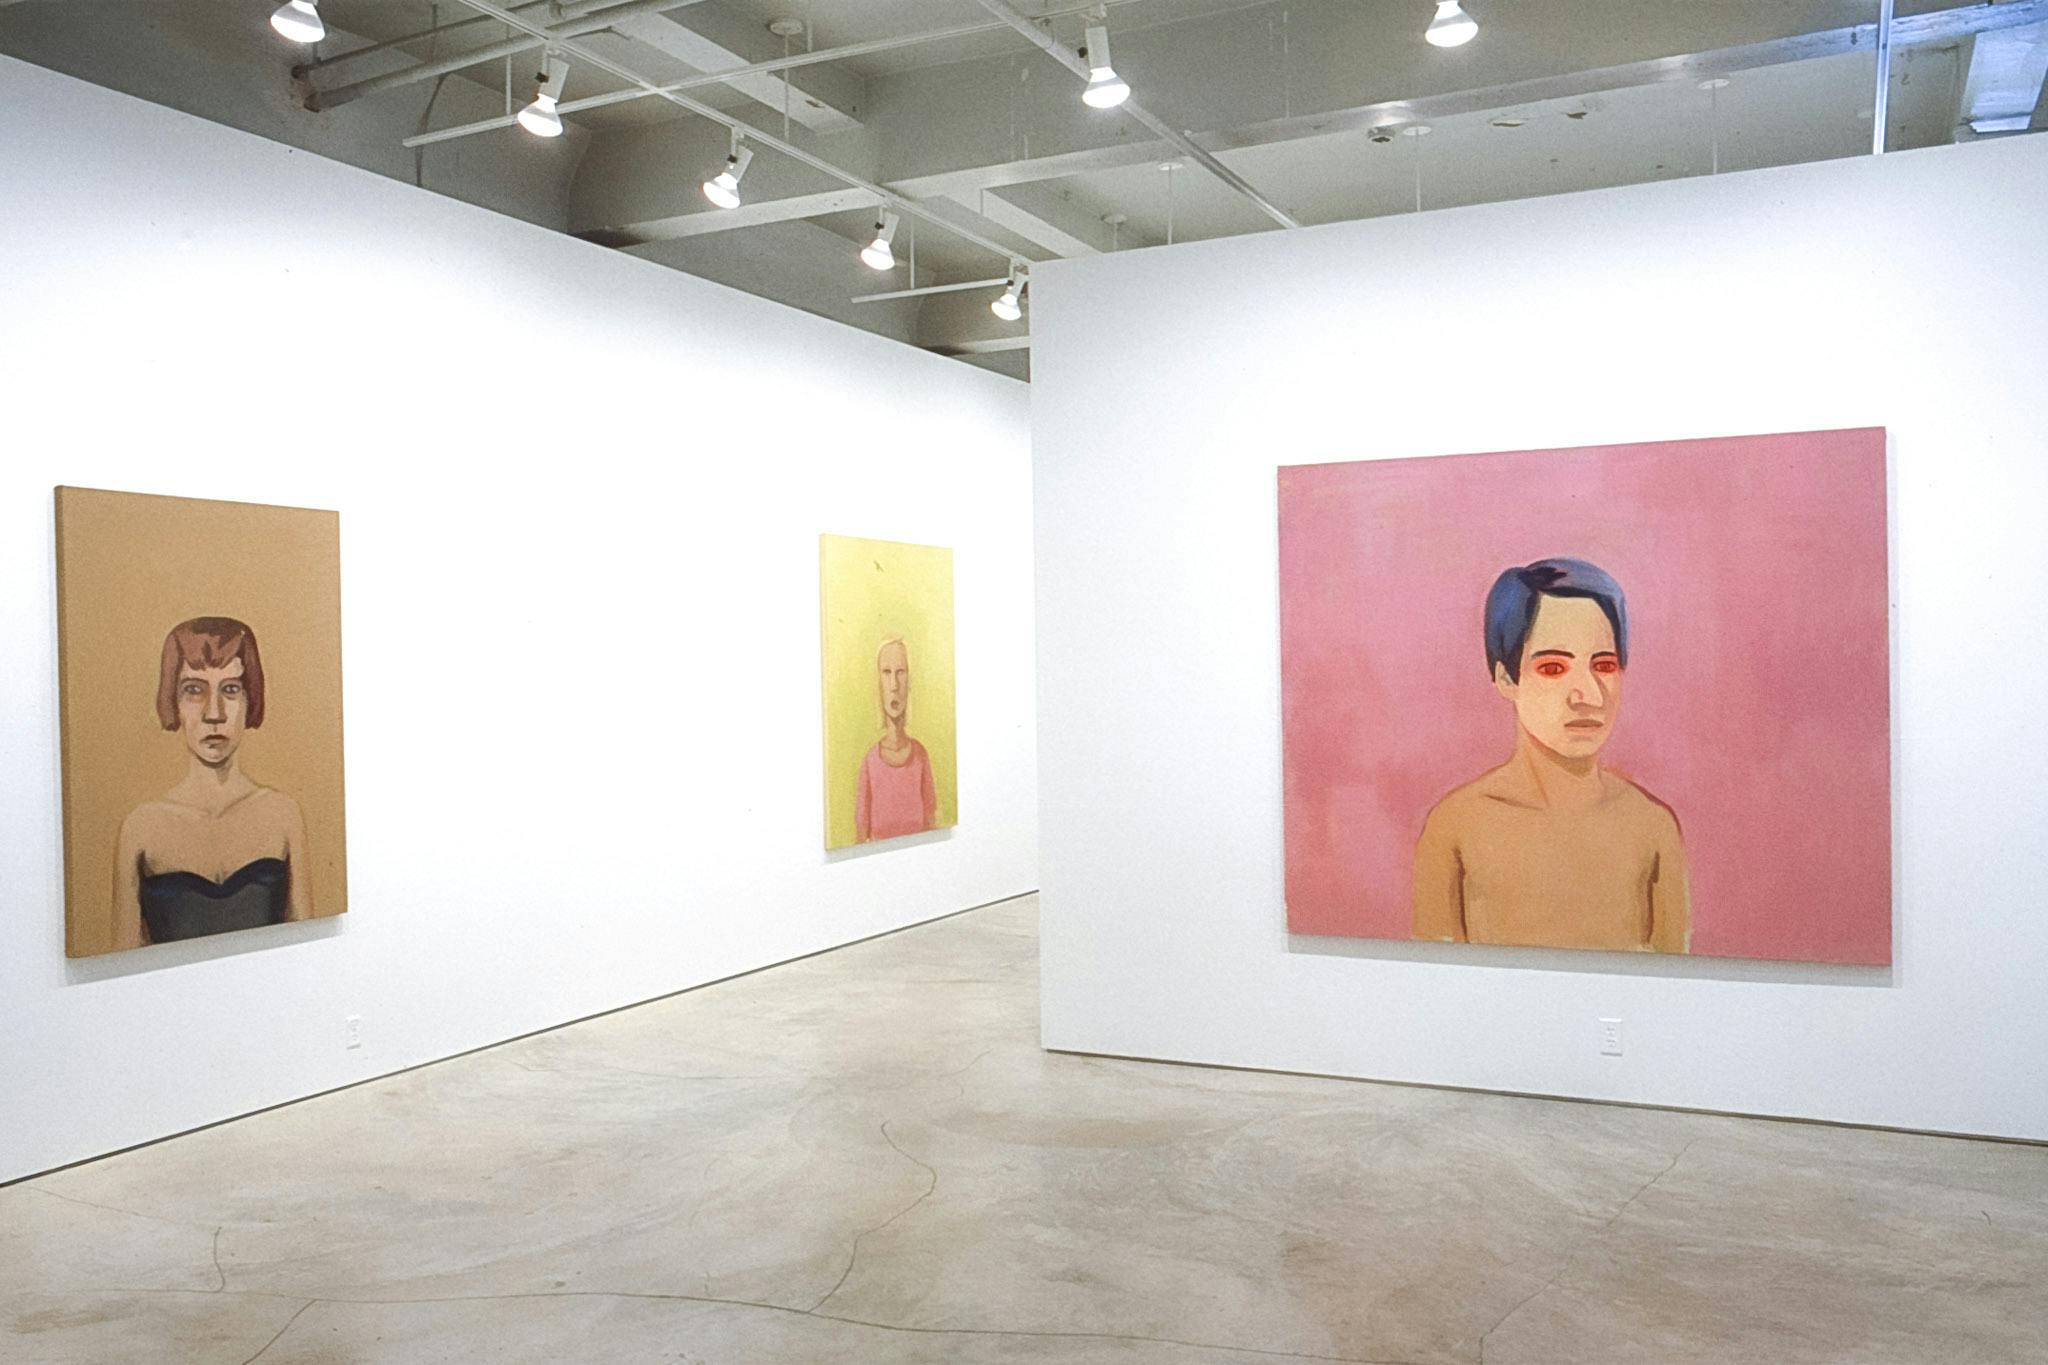 Three portrait paintings are exhibited on the galley walls. The one in the front has a red-eyed person in a pink background, and the one on the left is a woman in black standing in a brown background. 